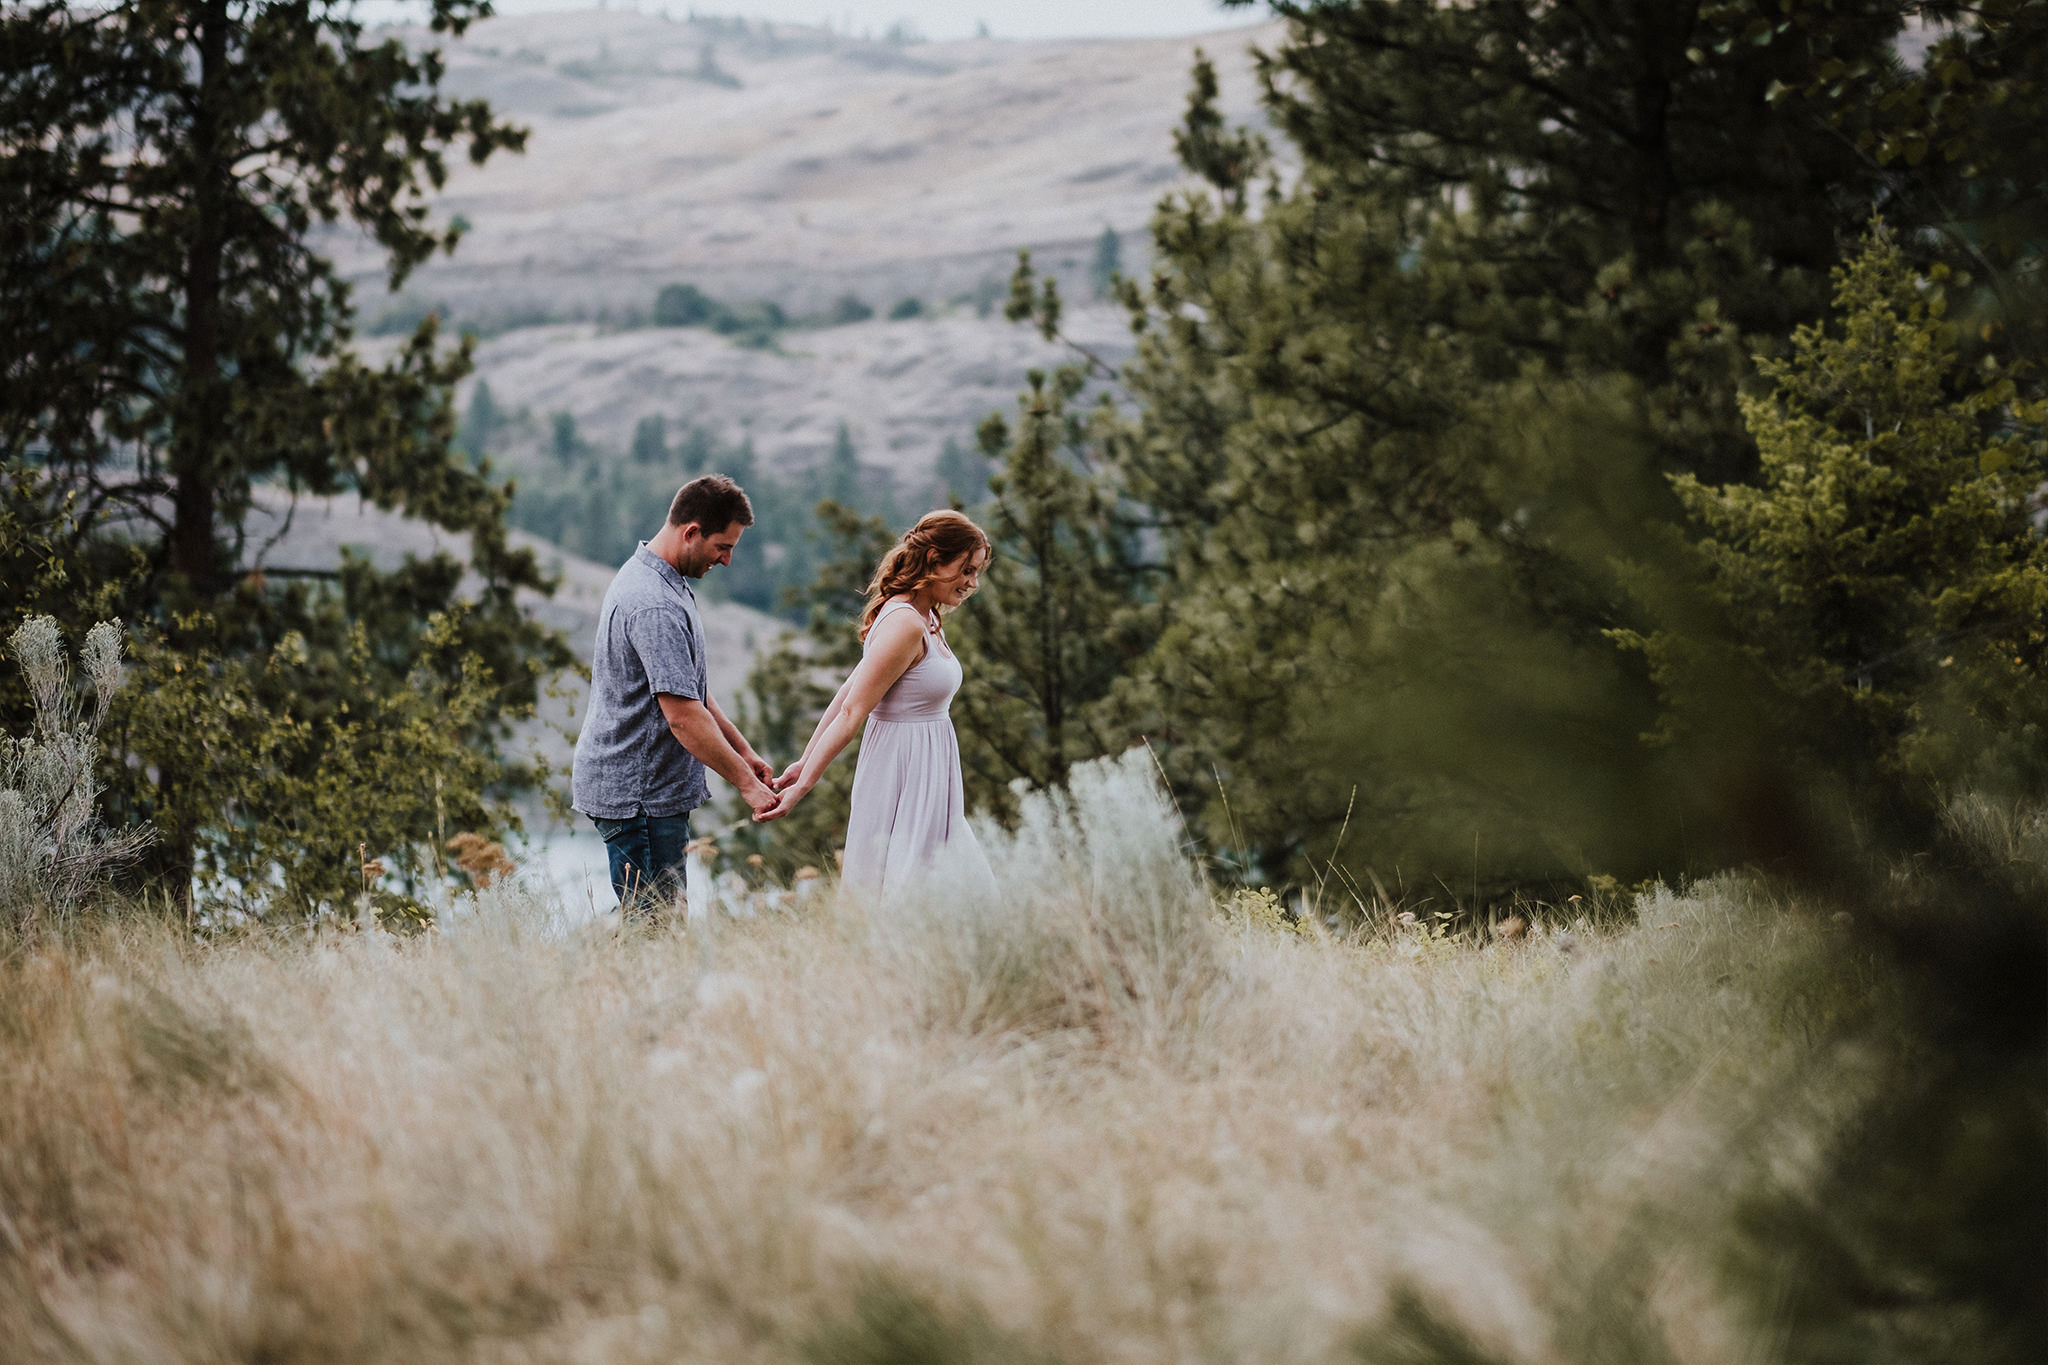 Girl leads her boyfriend by the hand in a field of tall grass